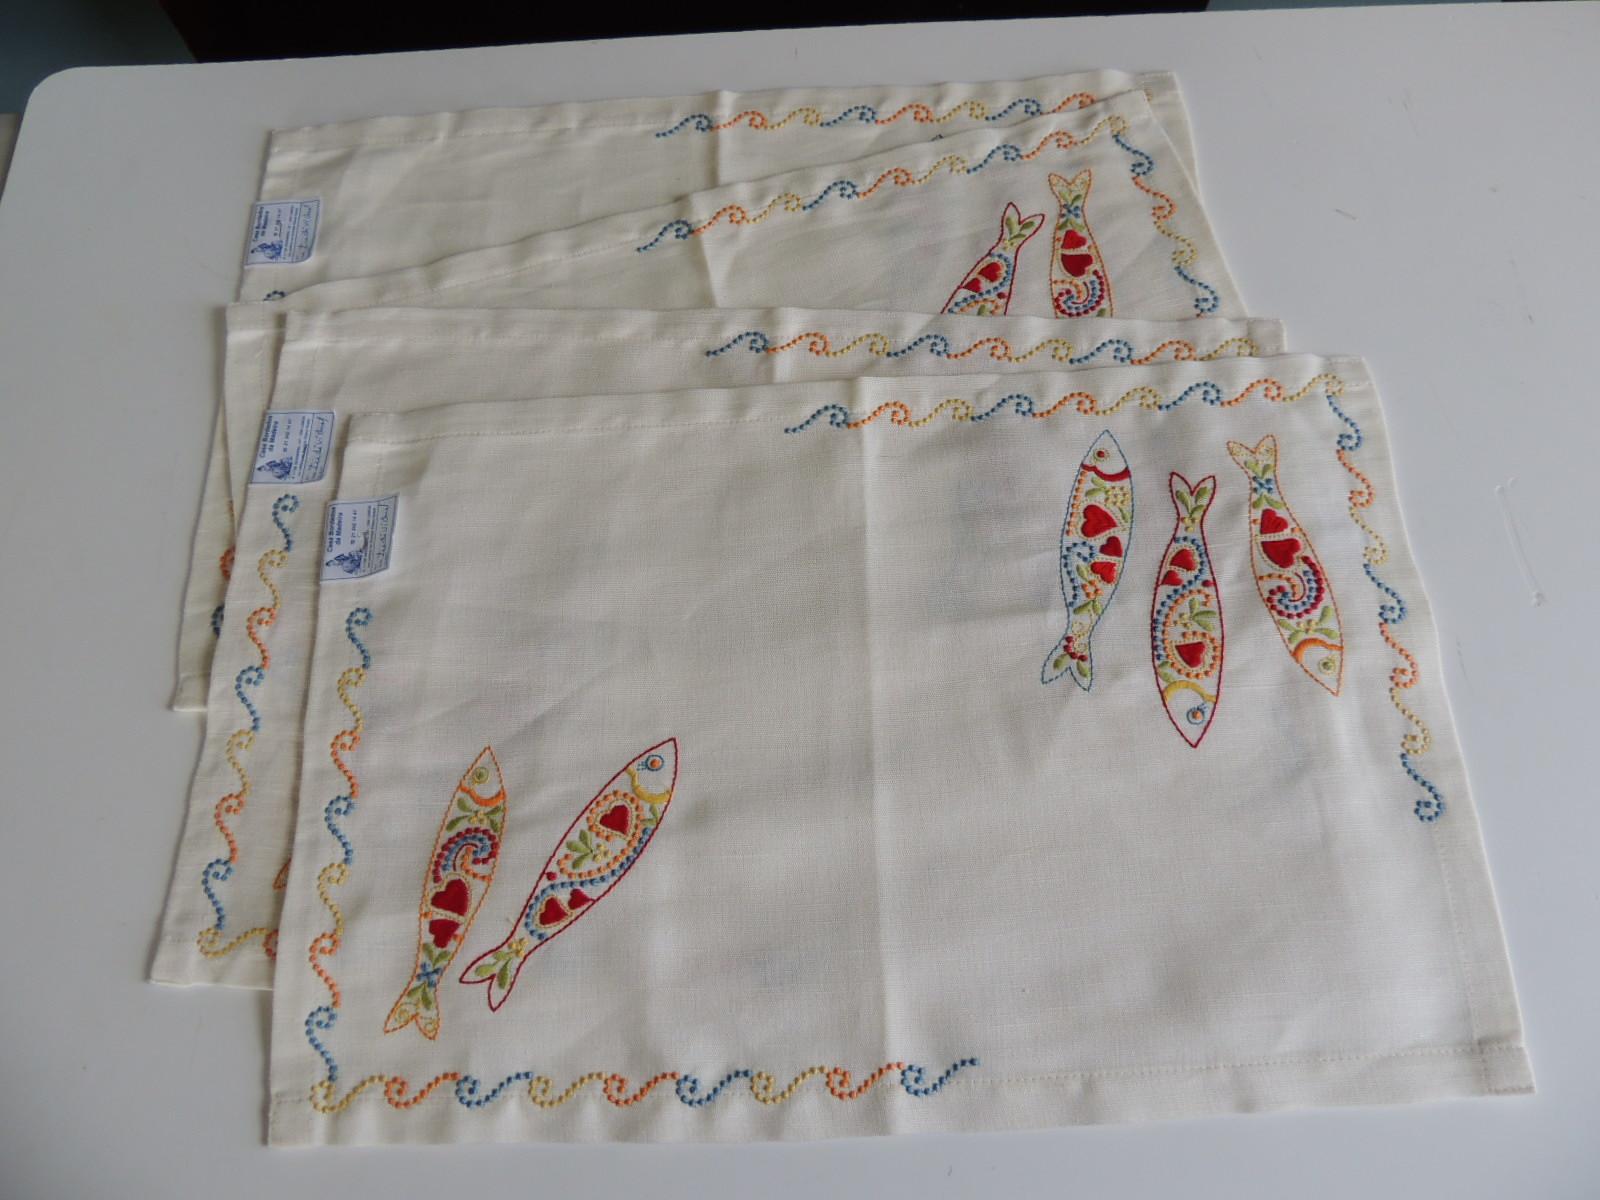 Set of (4) Embroidered Linen Placemats made in Portugal.
(tags attached)
Size: 12.5